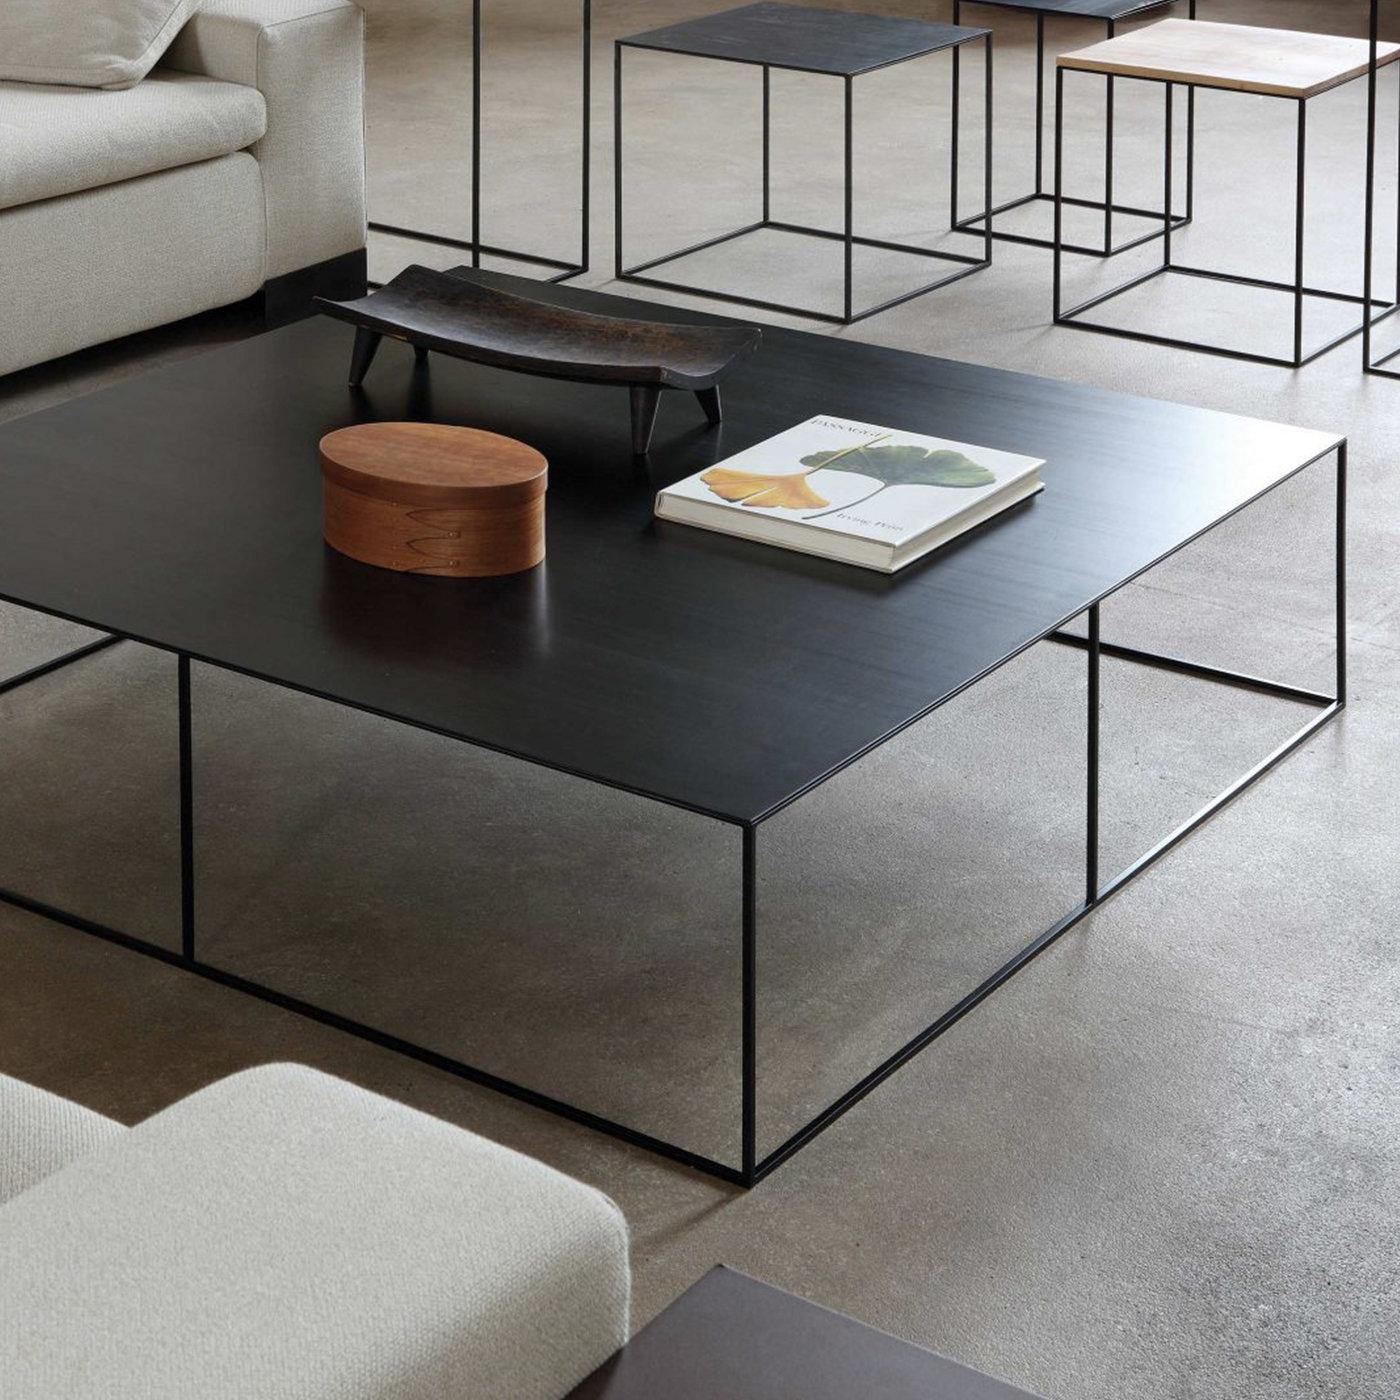 This exquisite coffee table will make a statement in a black and white or neutral-colored decor, particularly if contemporary or Industrial, and will also complement other black furniture pieces by the same designer for a cohesive look. The